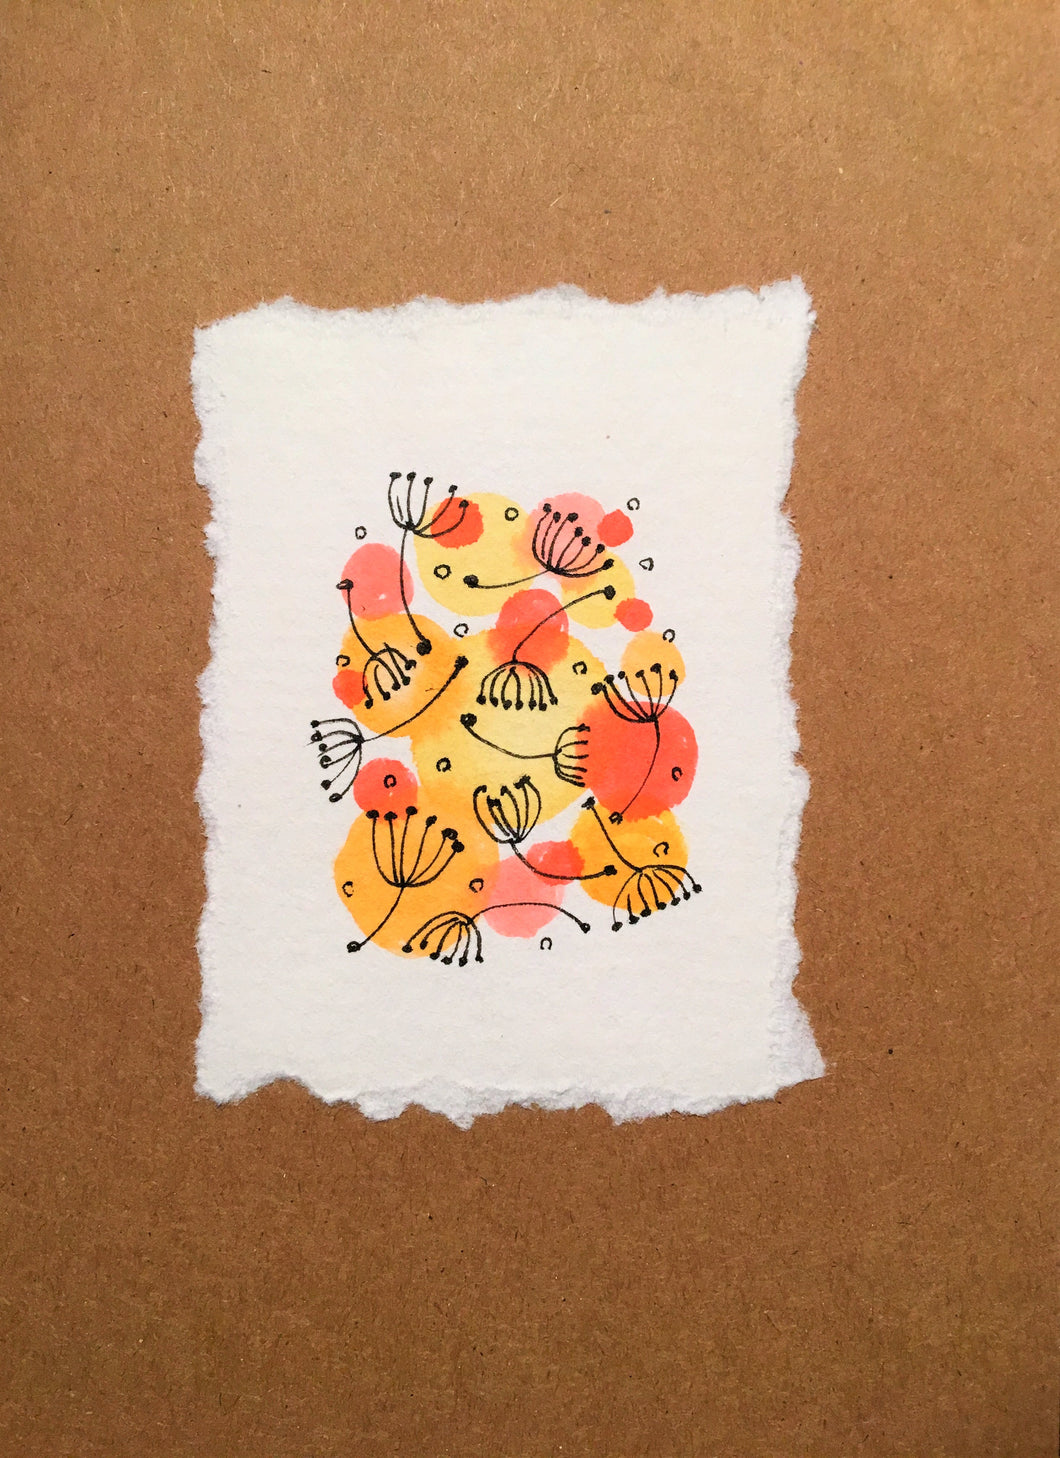 Handpainted Watercolour Greeting Card - Orange/Yellow/Red with Abstract Design - eDgE dEsiGn London